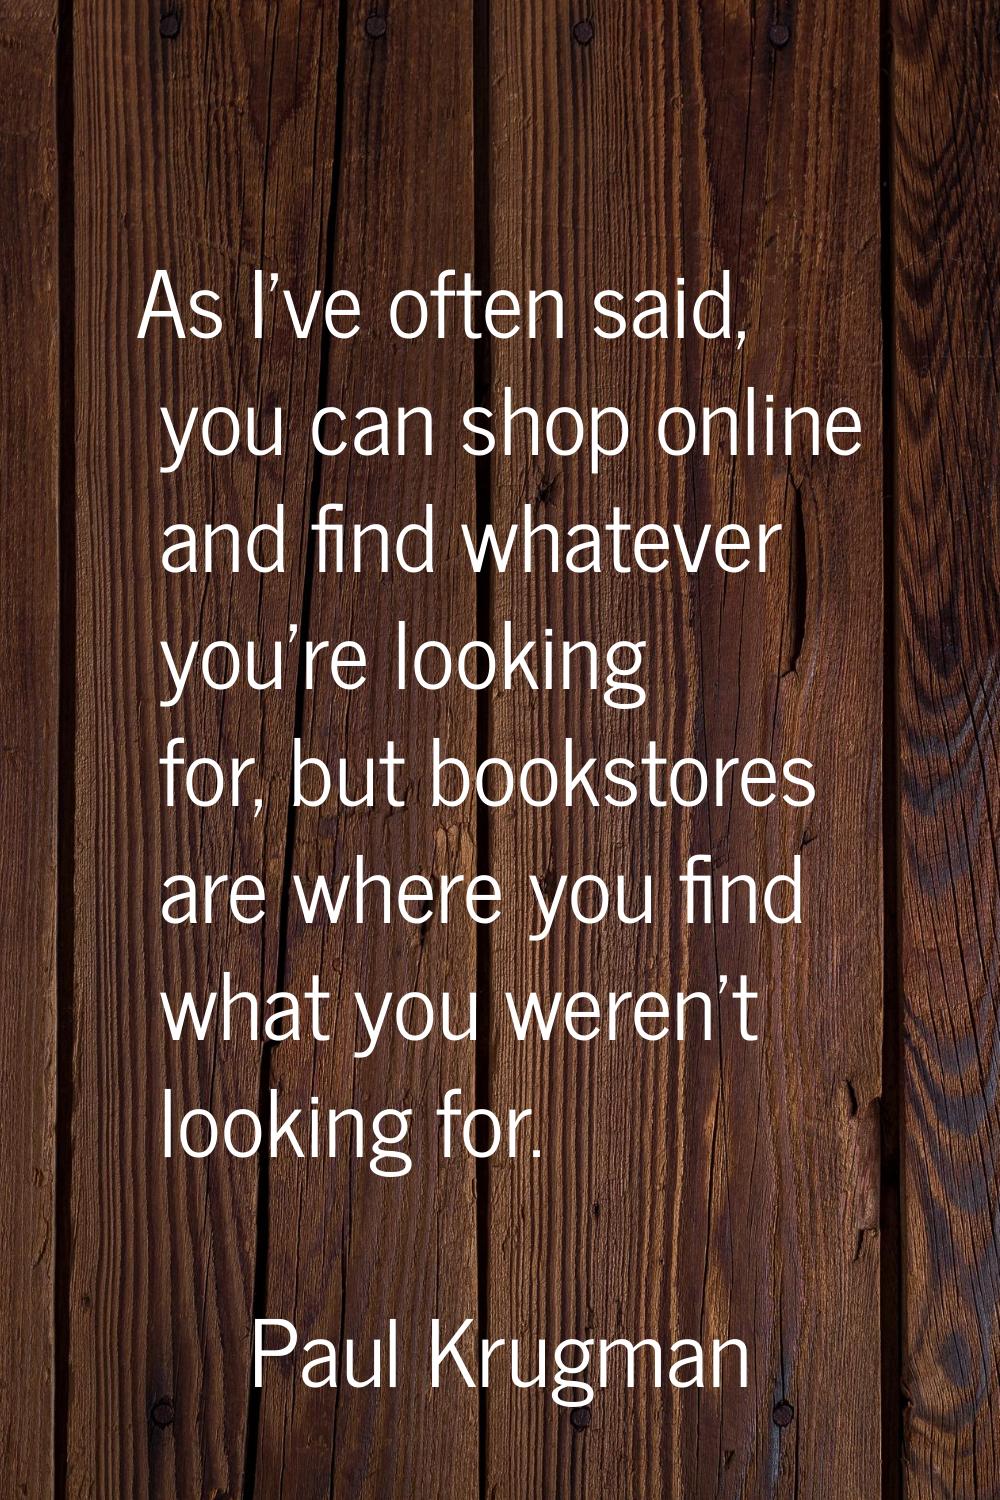 As I've often said, you can shop online and find whatever you're looking for, but bookstores are wh